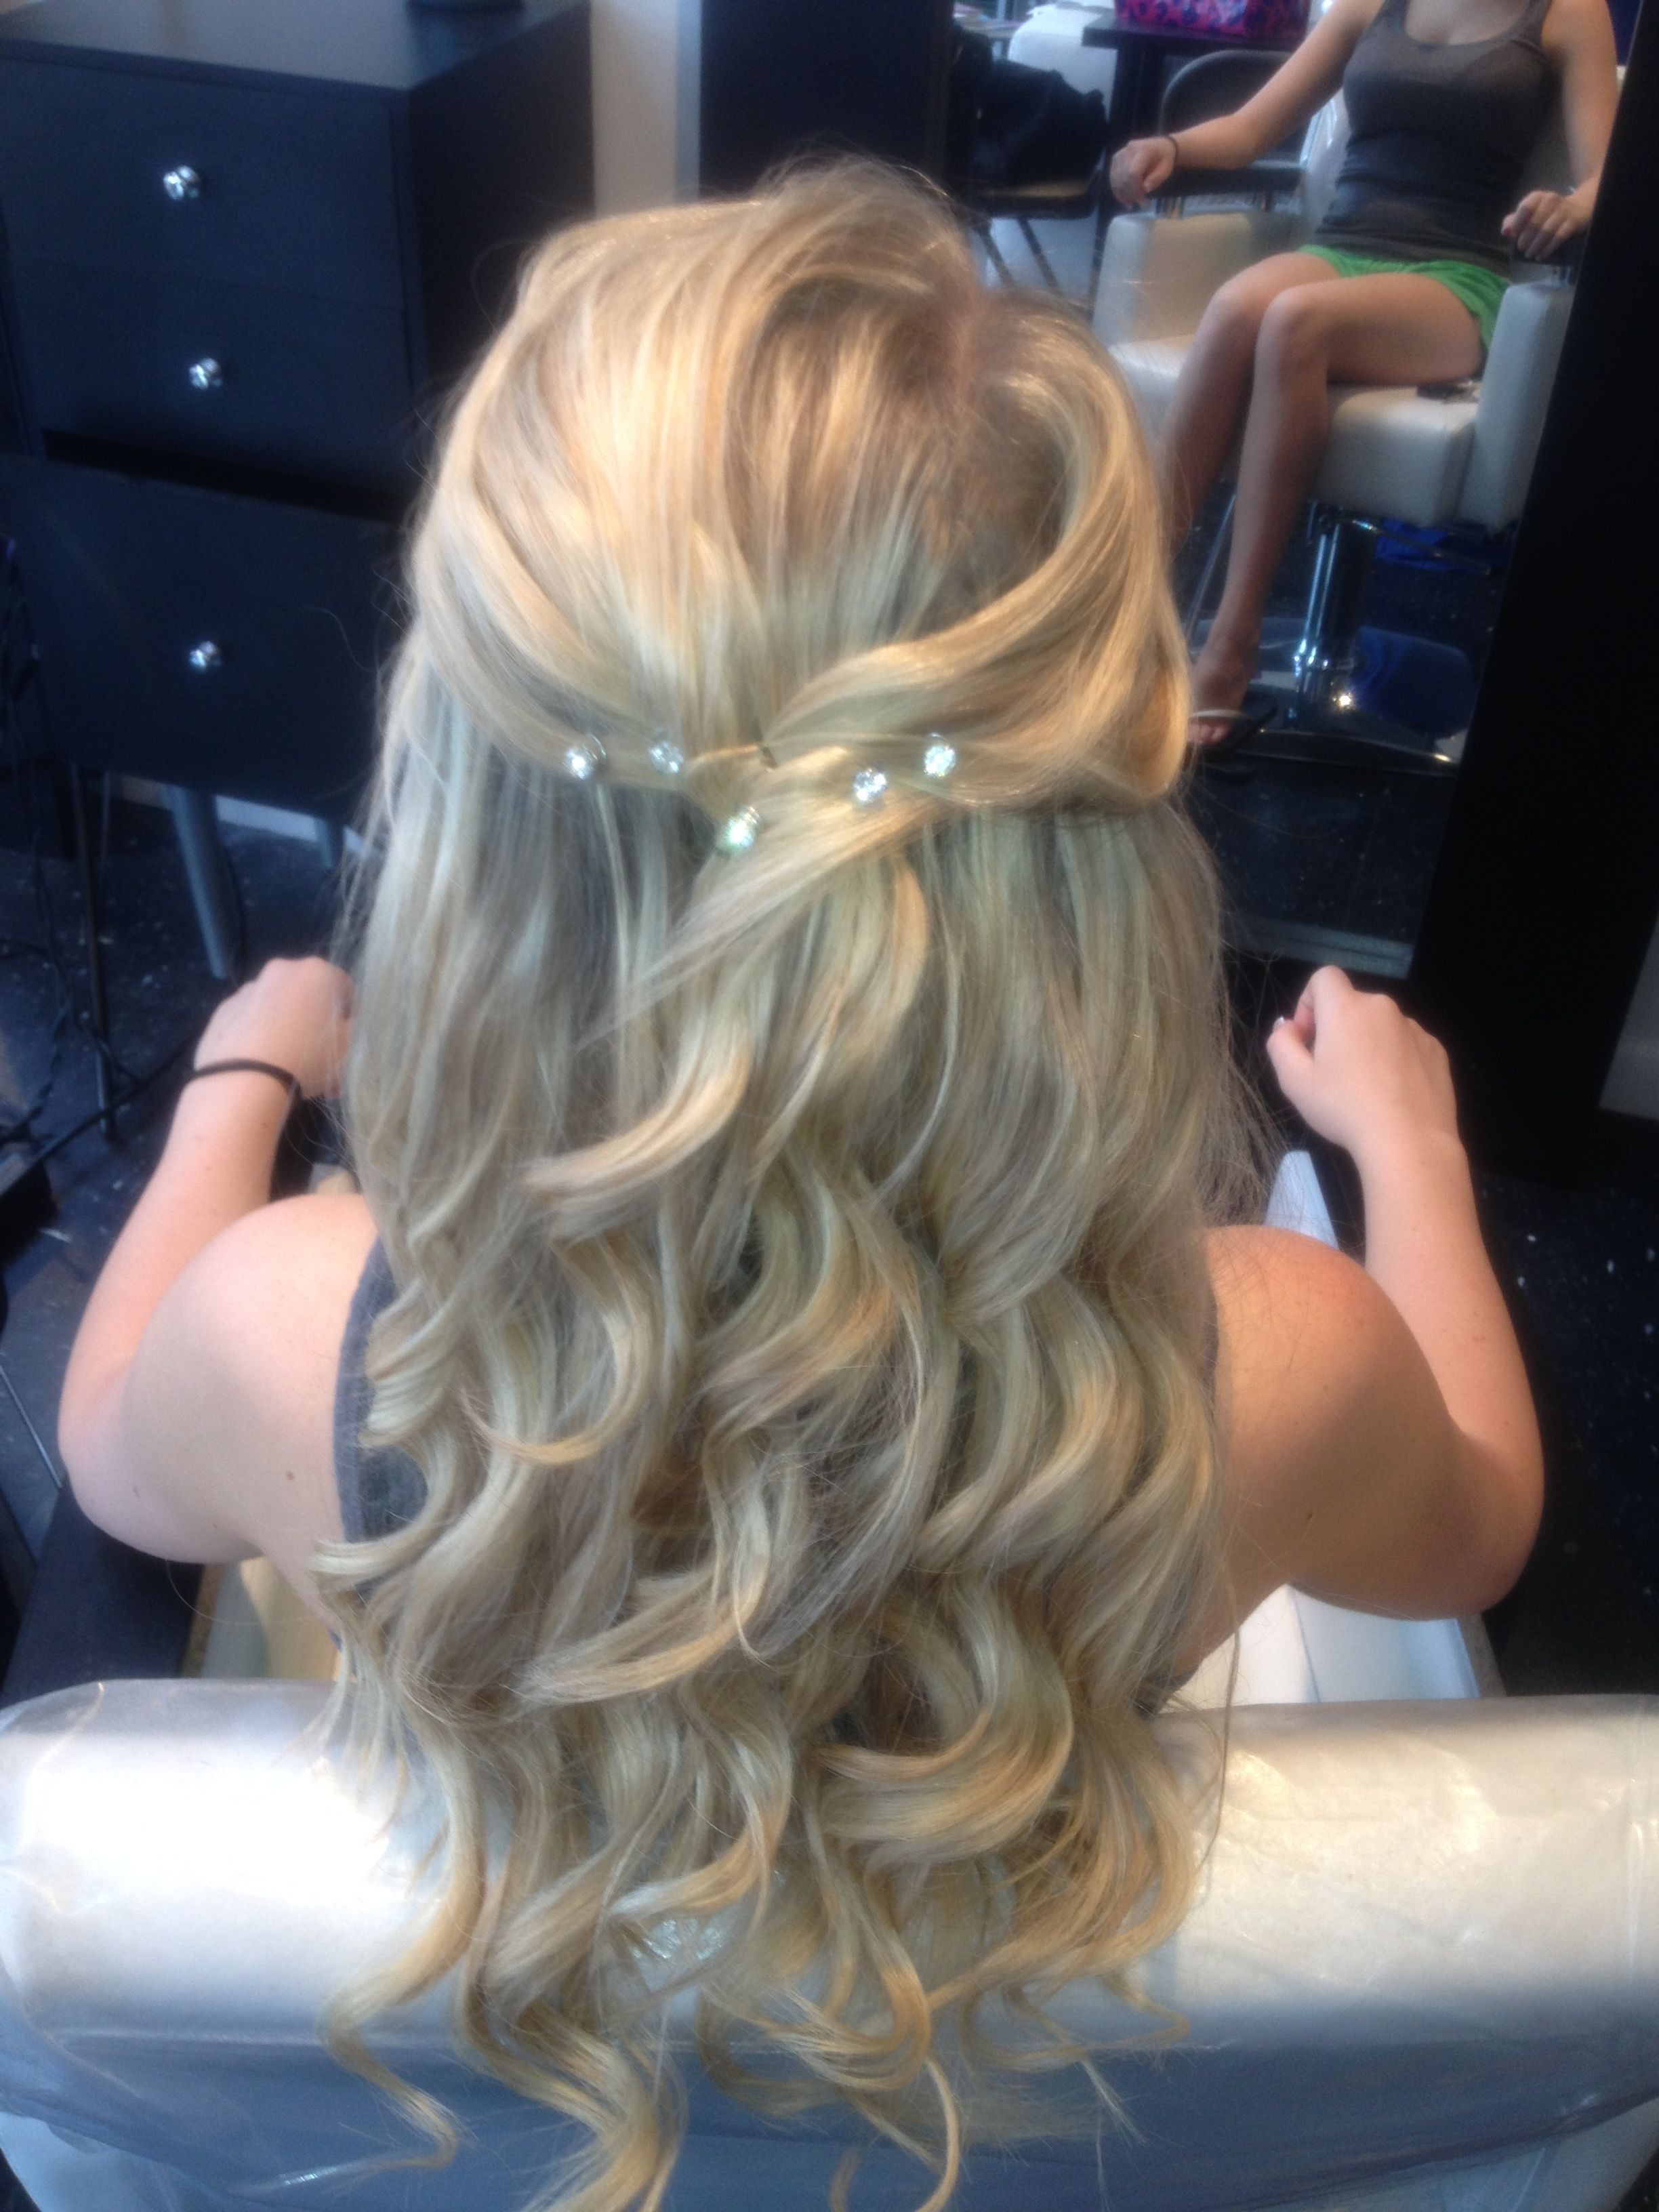 My Half Up Half Down Curled Prom Hair With Jewels (View 8 of 20)